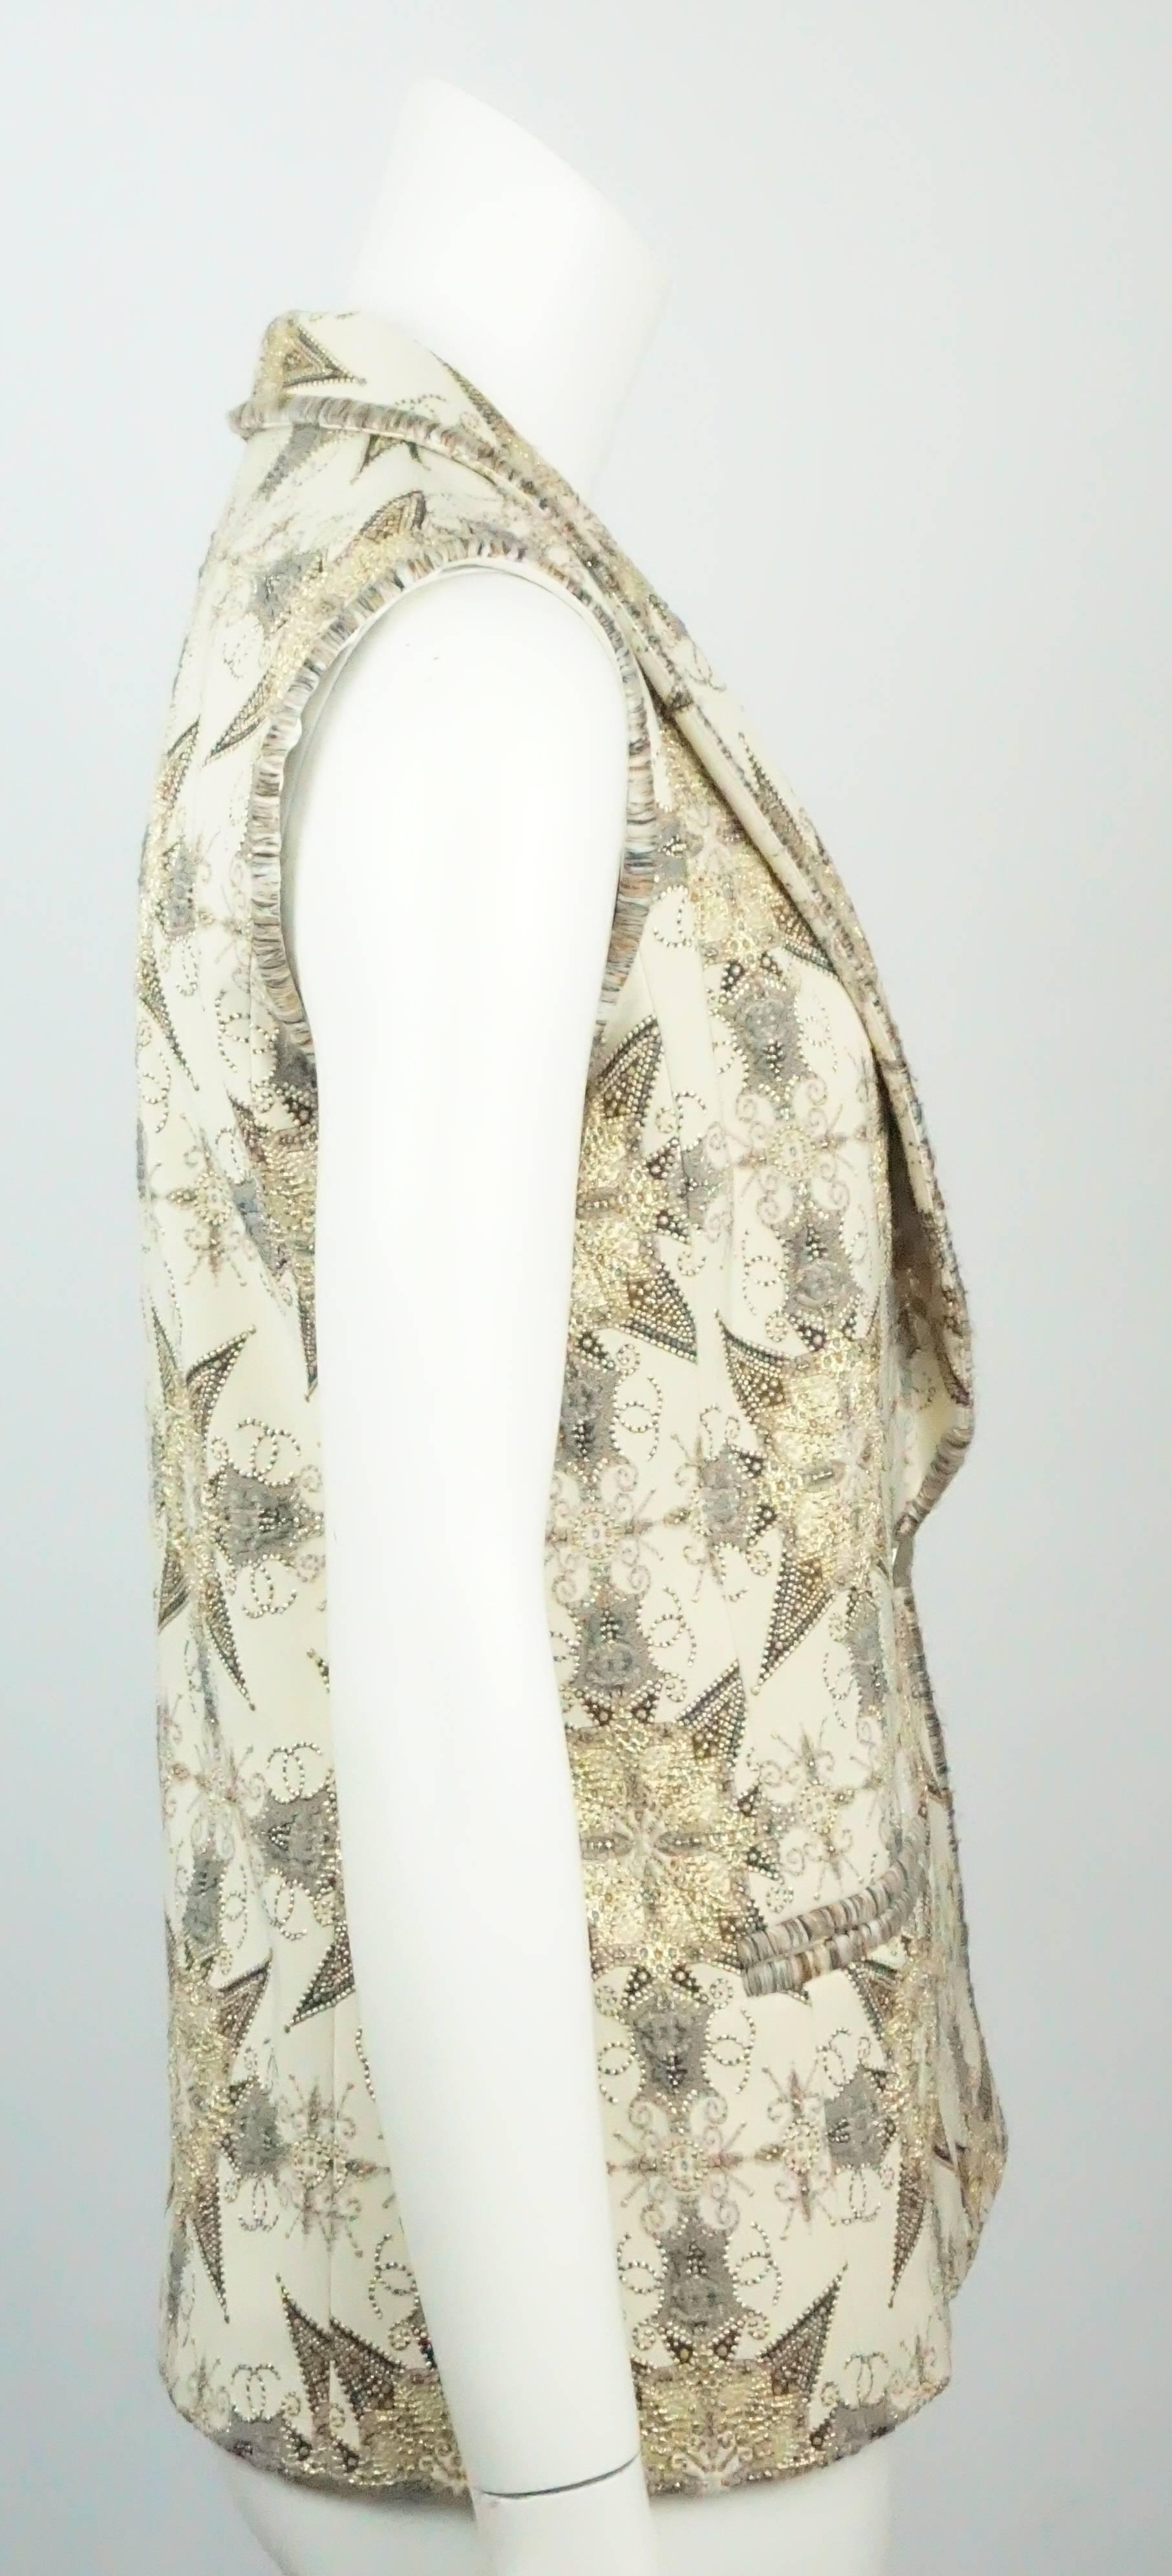 Chanel Cream and Metallic Silk Lined Brocade Vest-38-NWT  This beautiful and festive cream vest has Gold, and Earthtone Brocade and threading throughout with an ornate design. It has one front gold button and two illusion pockets. The vest has a